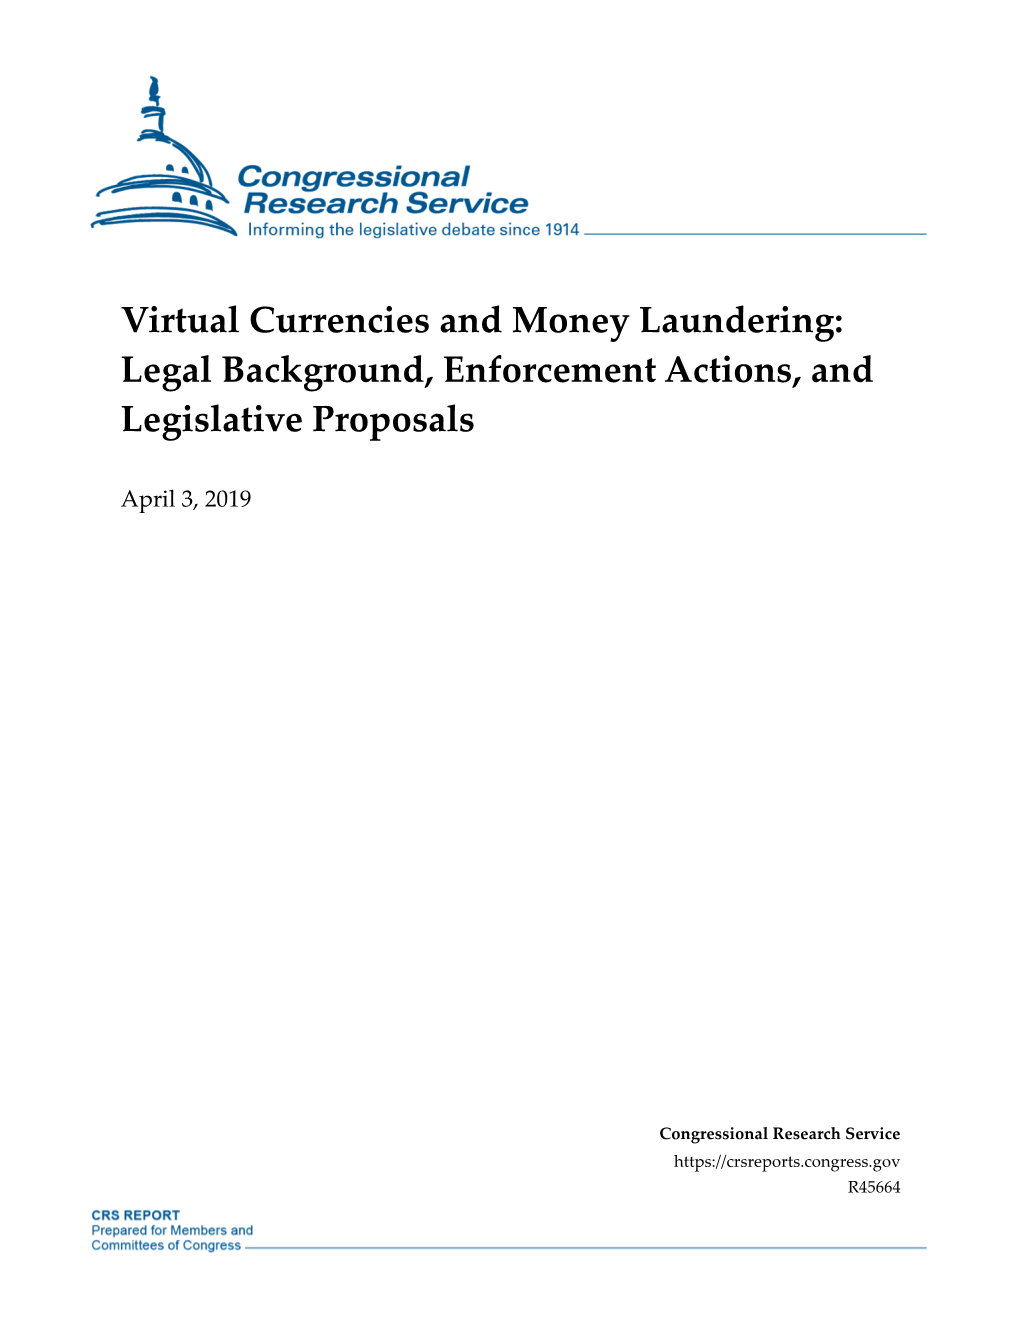 Virtual Currencies and Money Laundering: Legal Background, Enforcement Actions, and Legislative Proposals